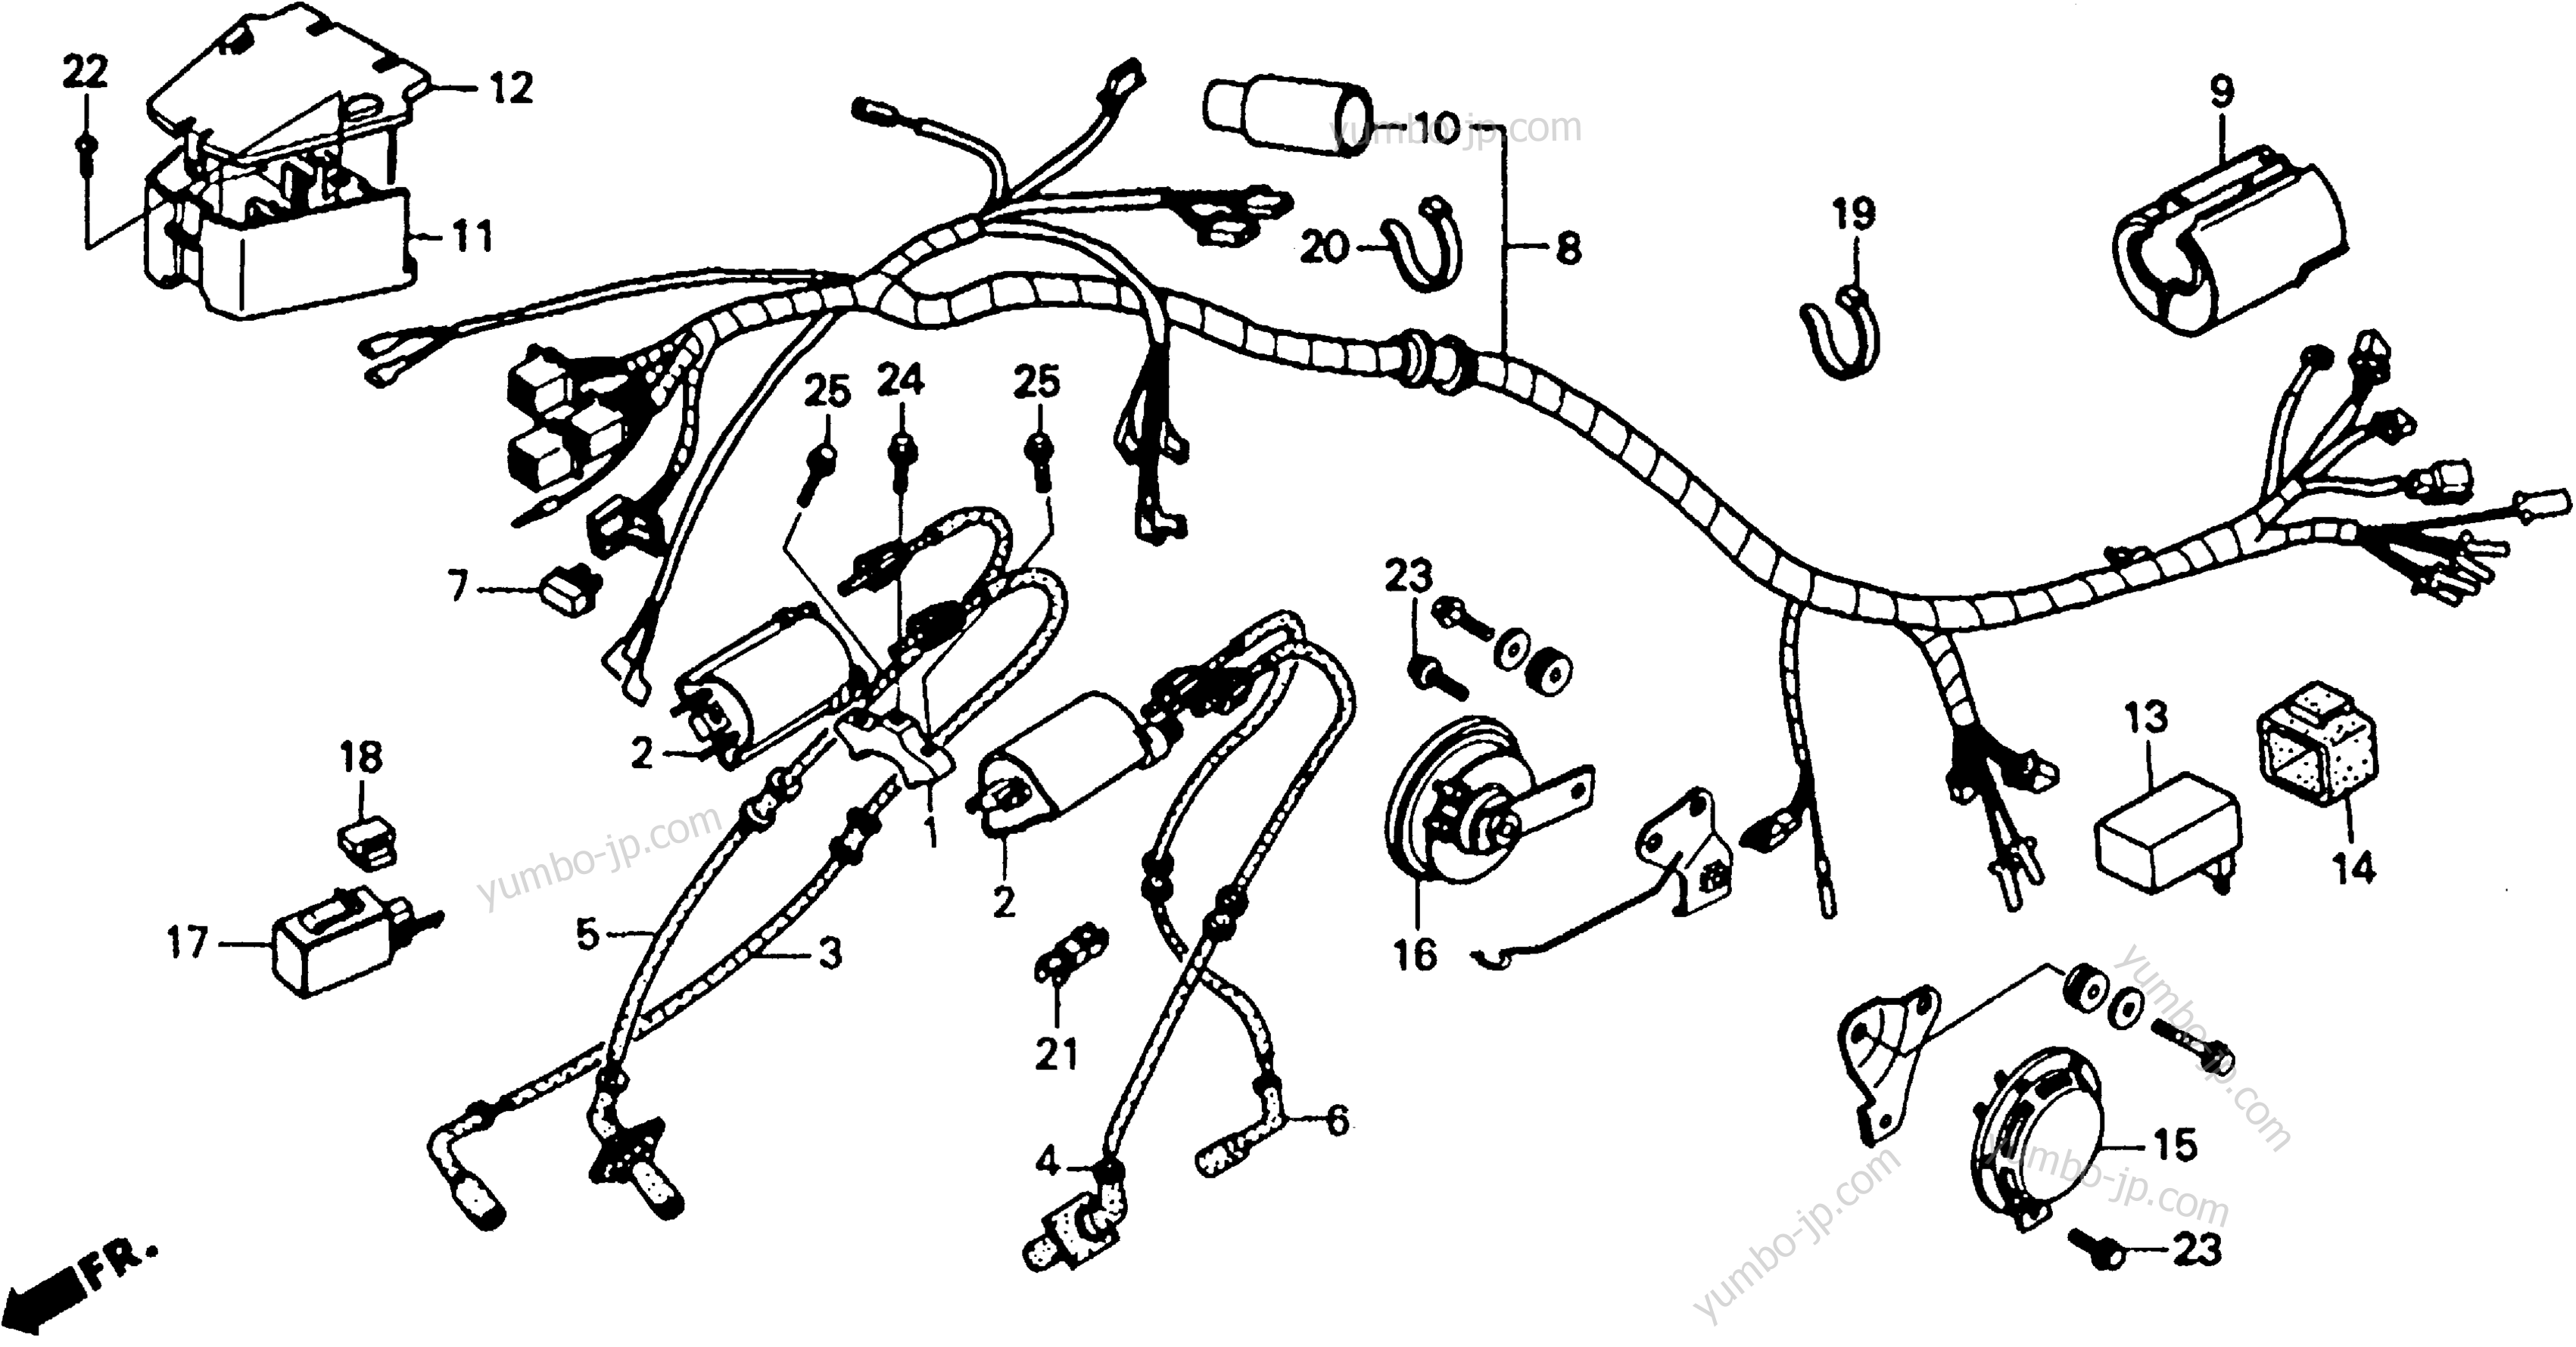 WIRE HARNESS for motorcycles HONDA VT1100C AC 1990 year